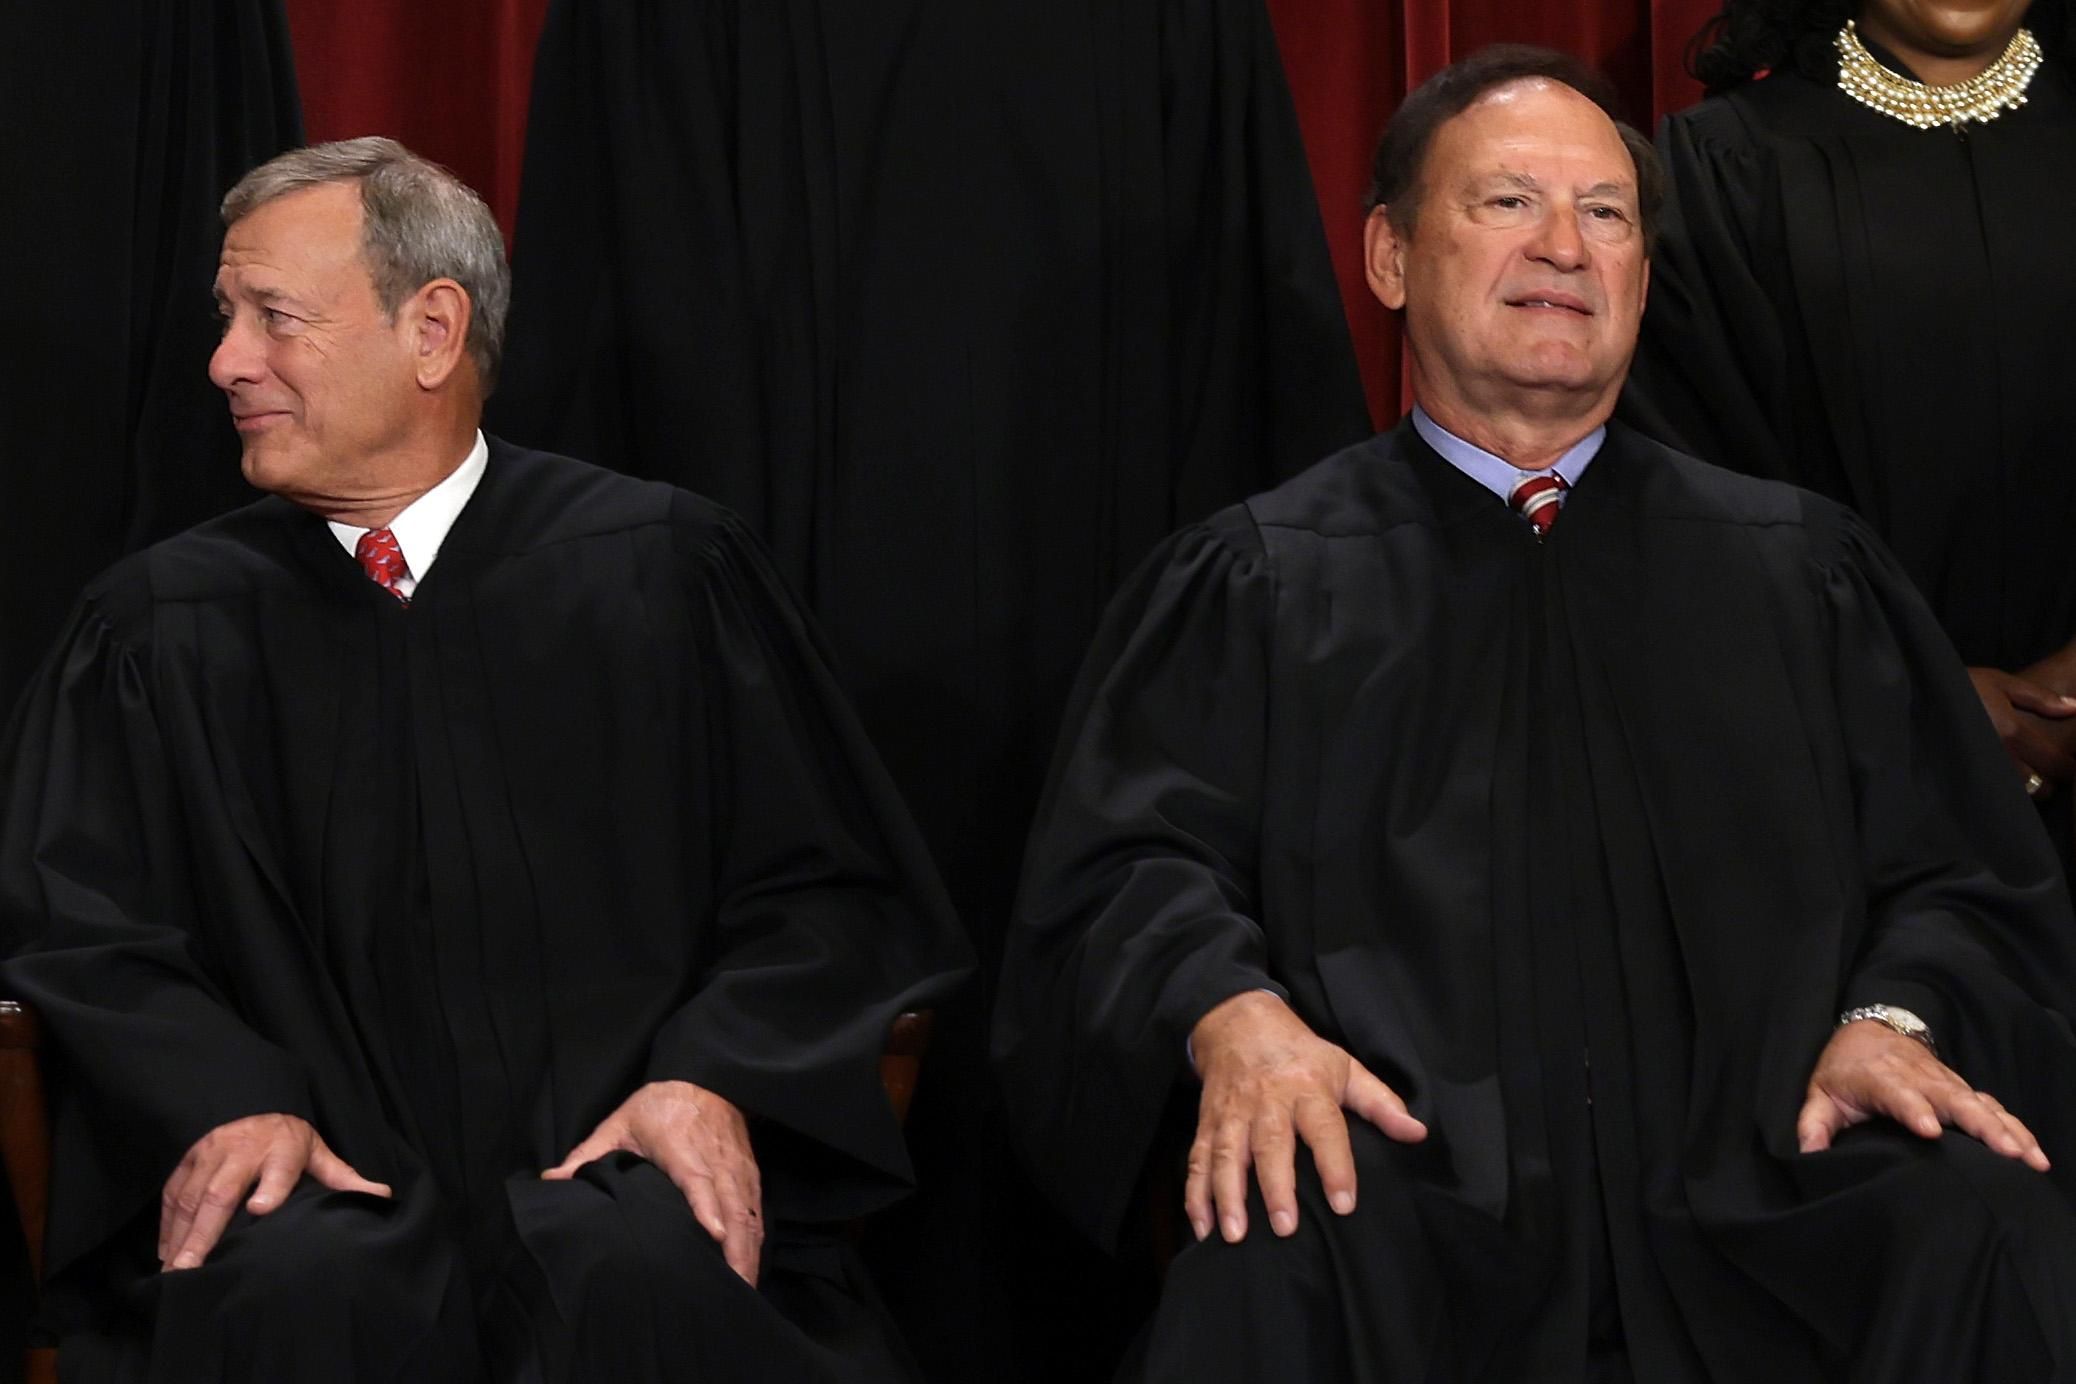 Calls for SCOTUS Ethics Probe Grow as Court Lawyer Defends Alito